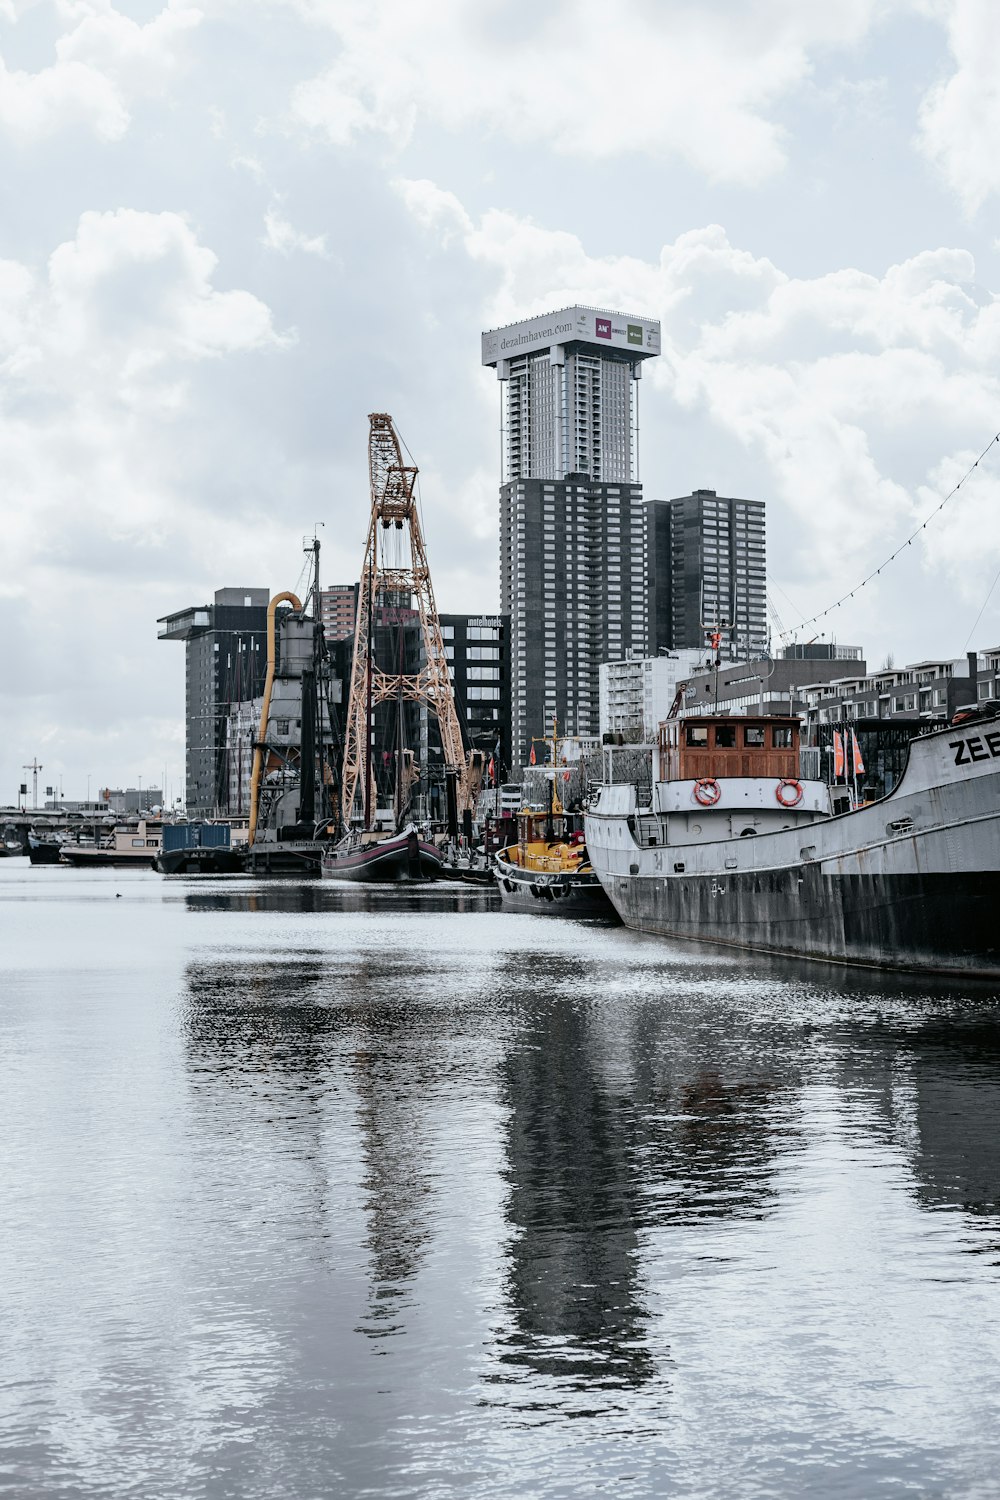 white and black ship on water near city buildings during daytime